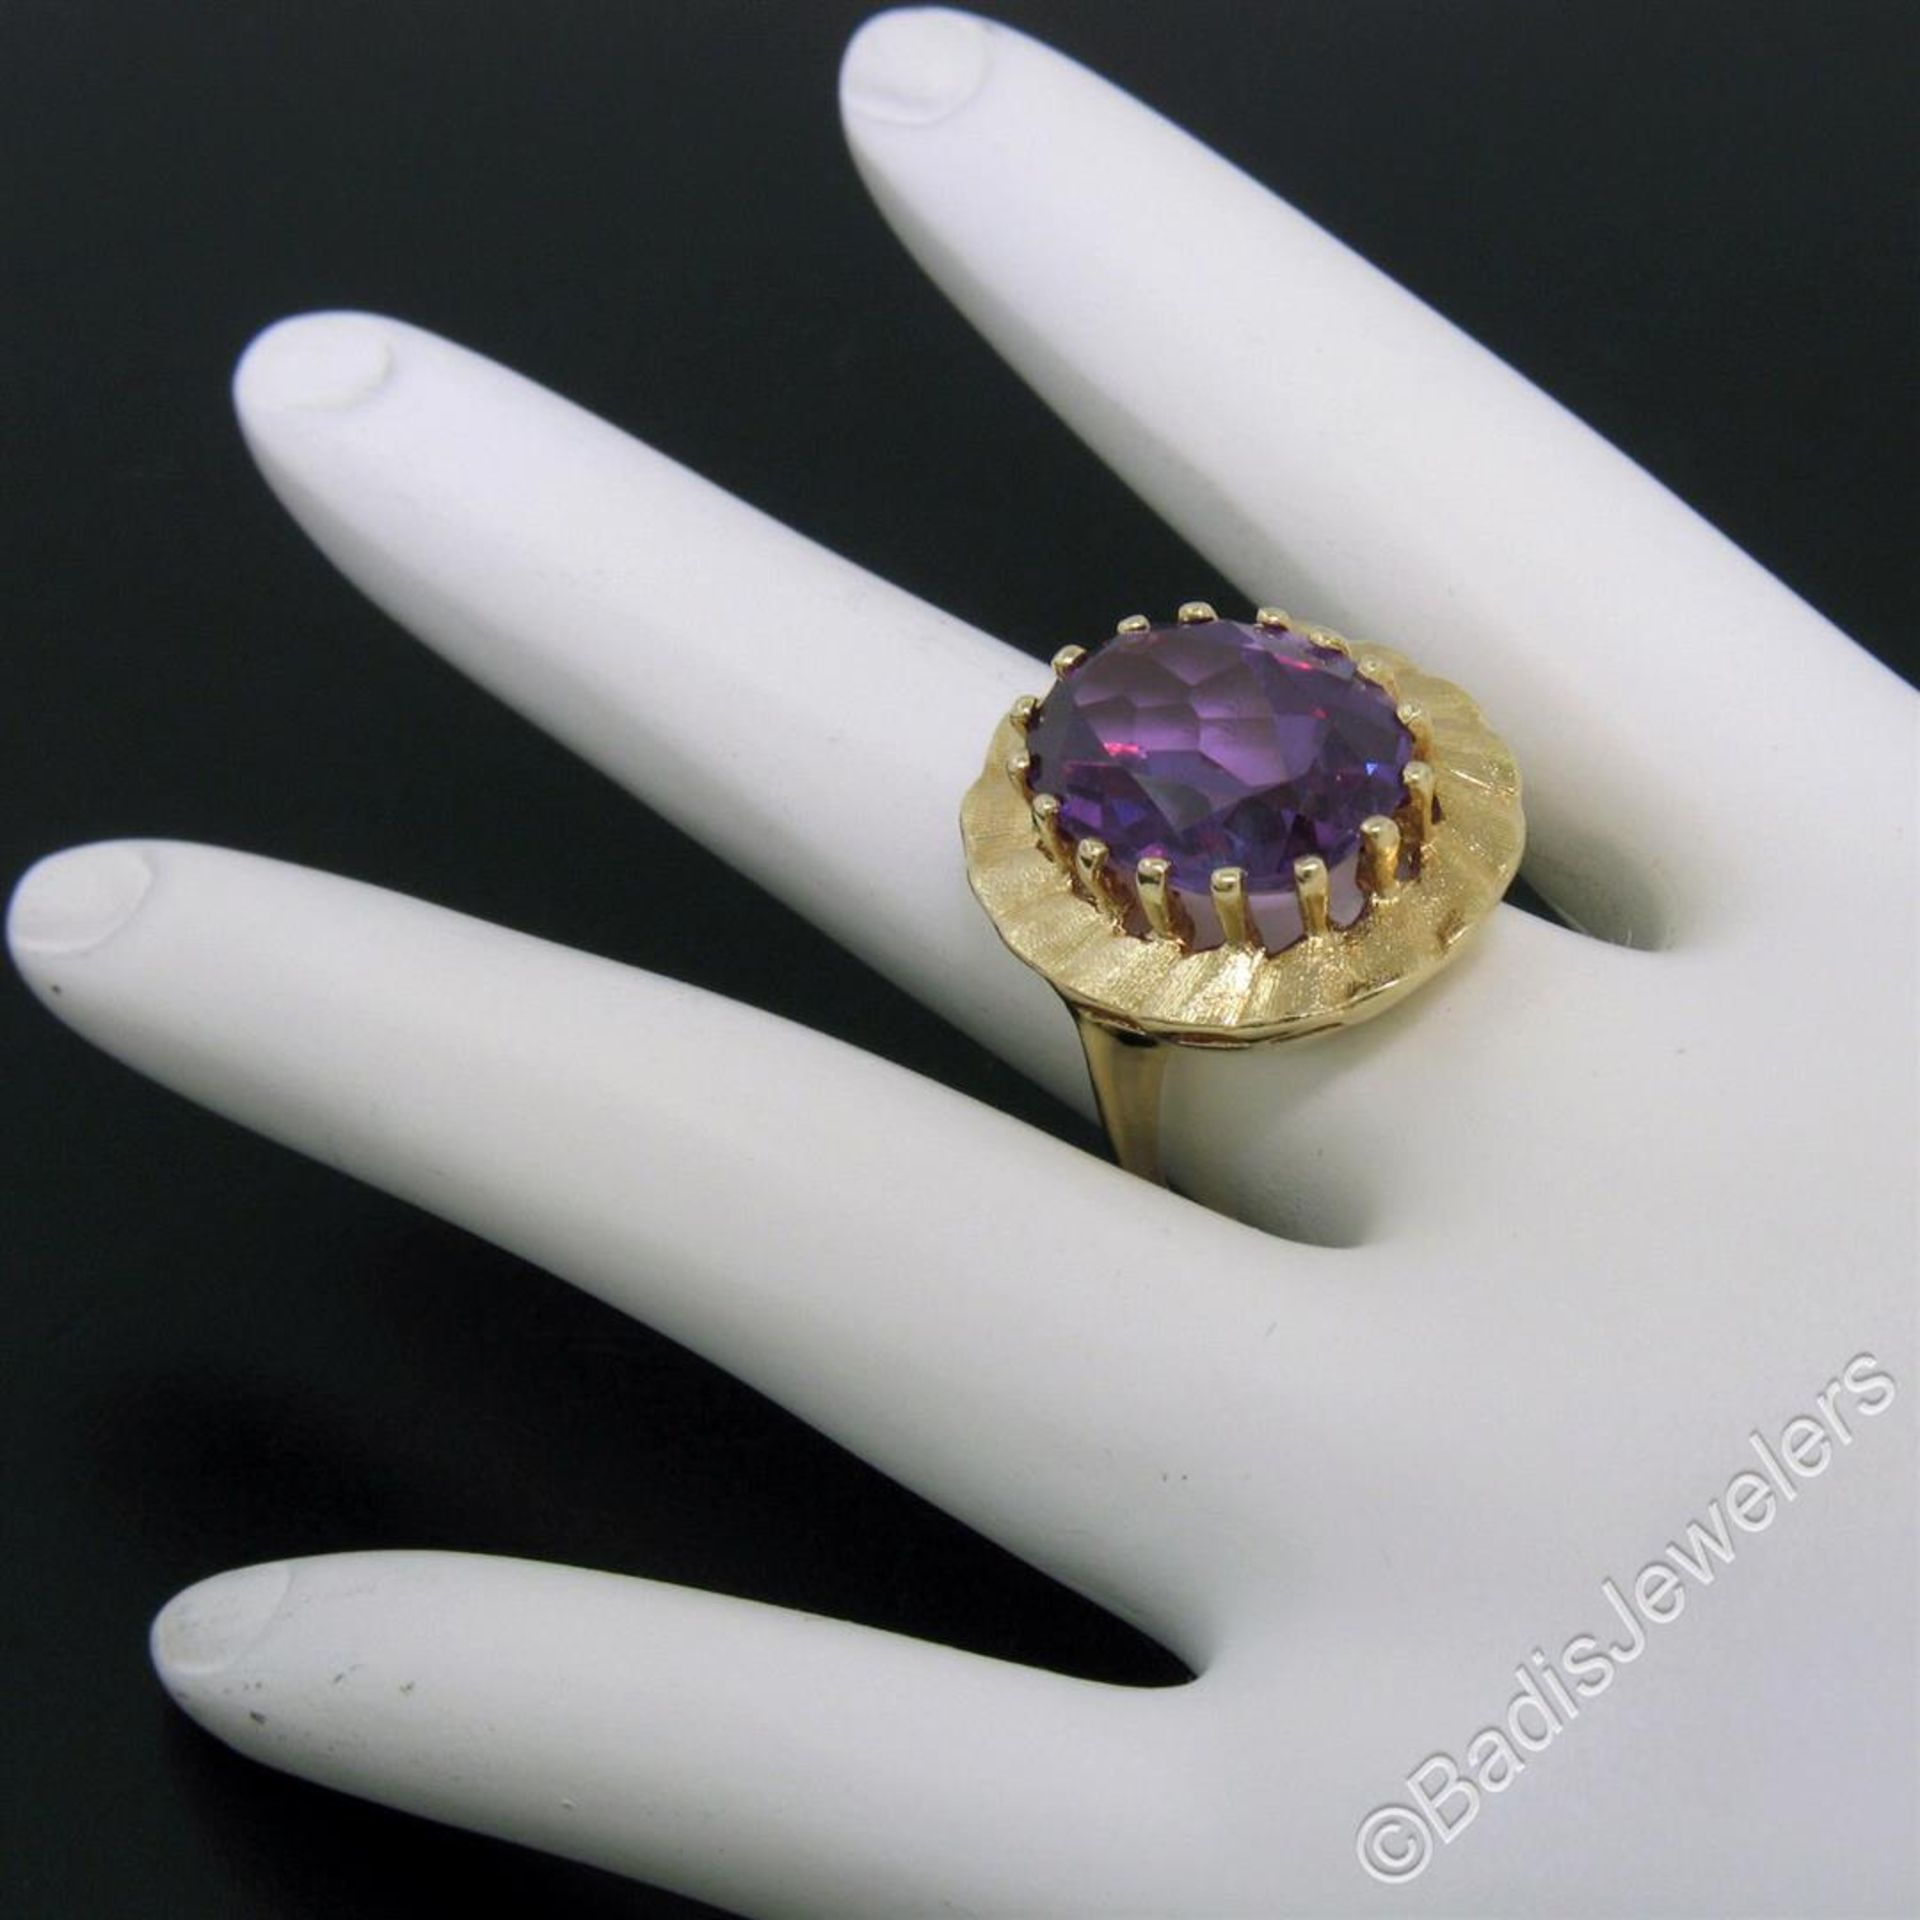 Vintage 14kt Yellow Gold Oval Synthetic Alexandrite Ring w/ Textured Halo - Image 9 of 9